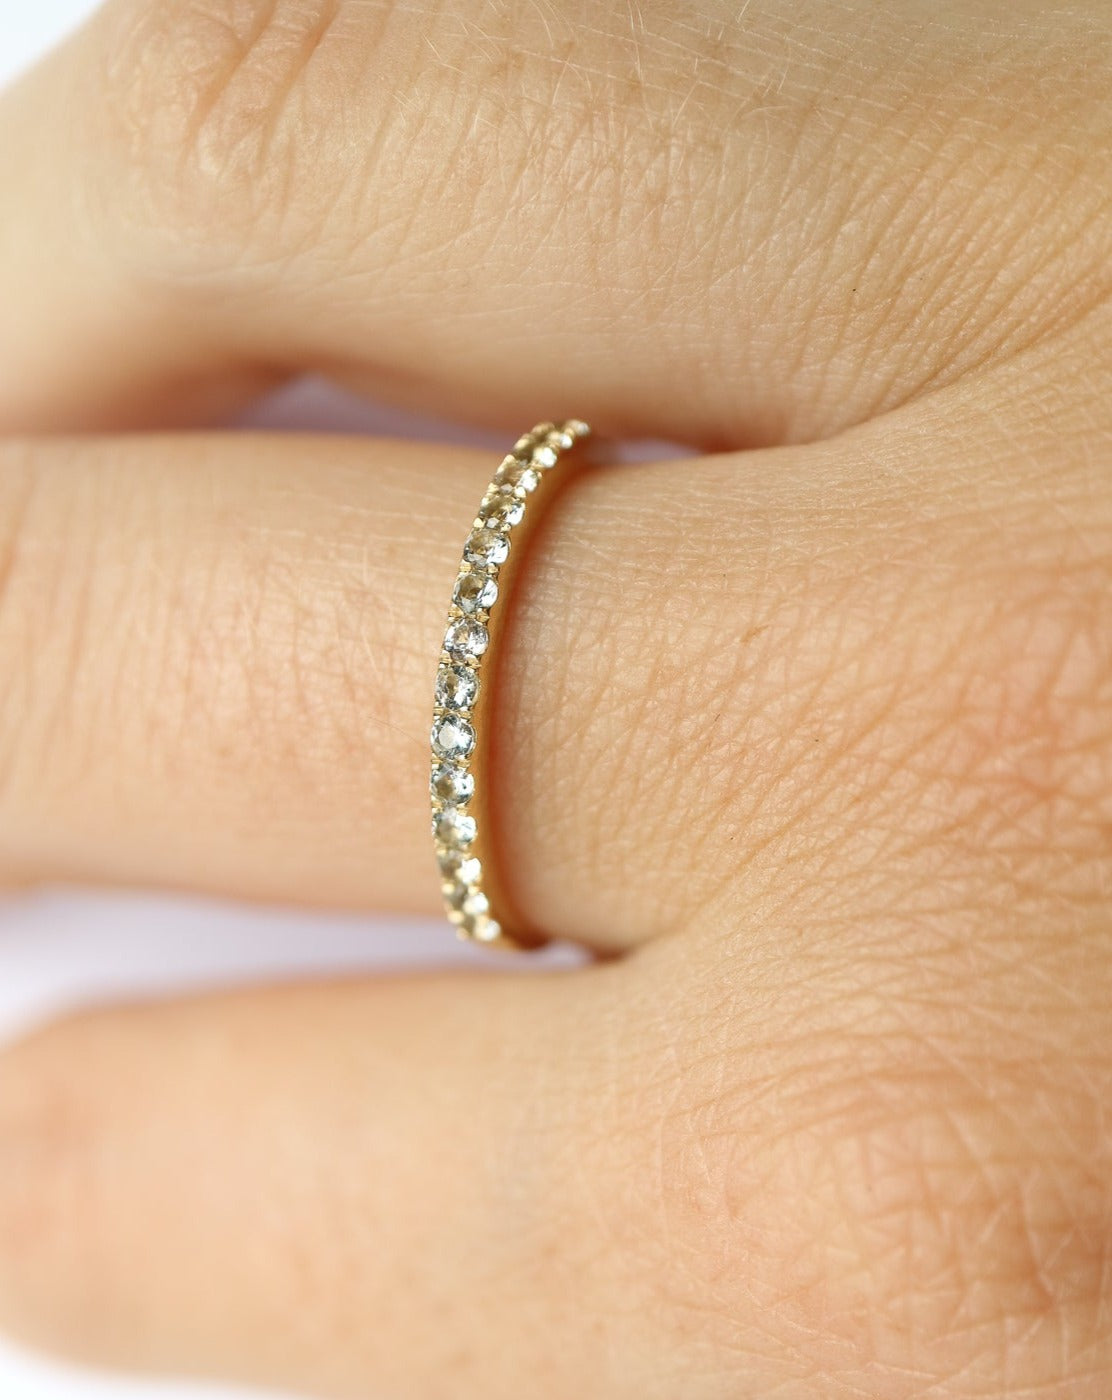 14kt gold Aquamarine half eternity ring from Collective & Co jewellery brand